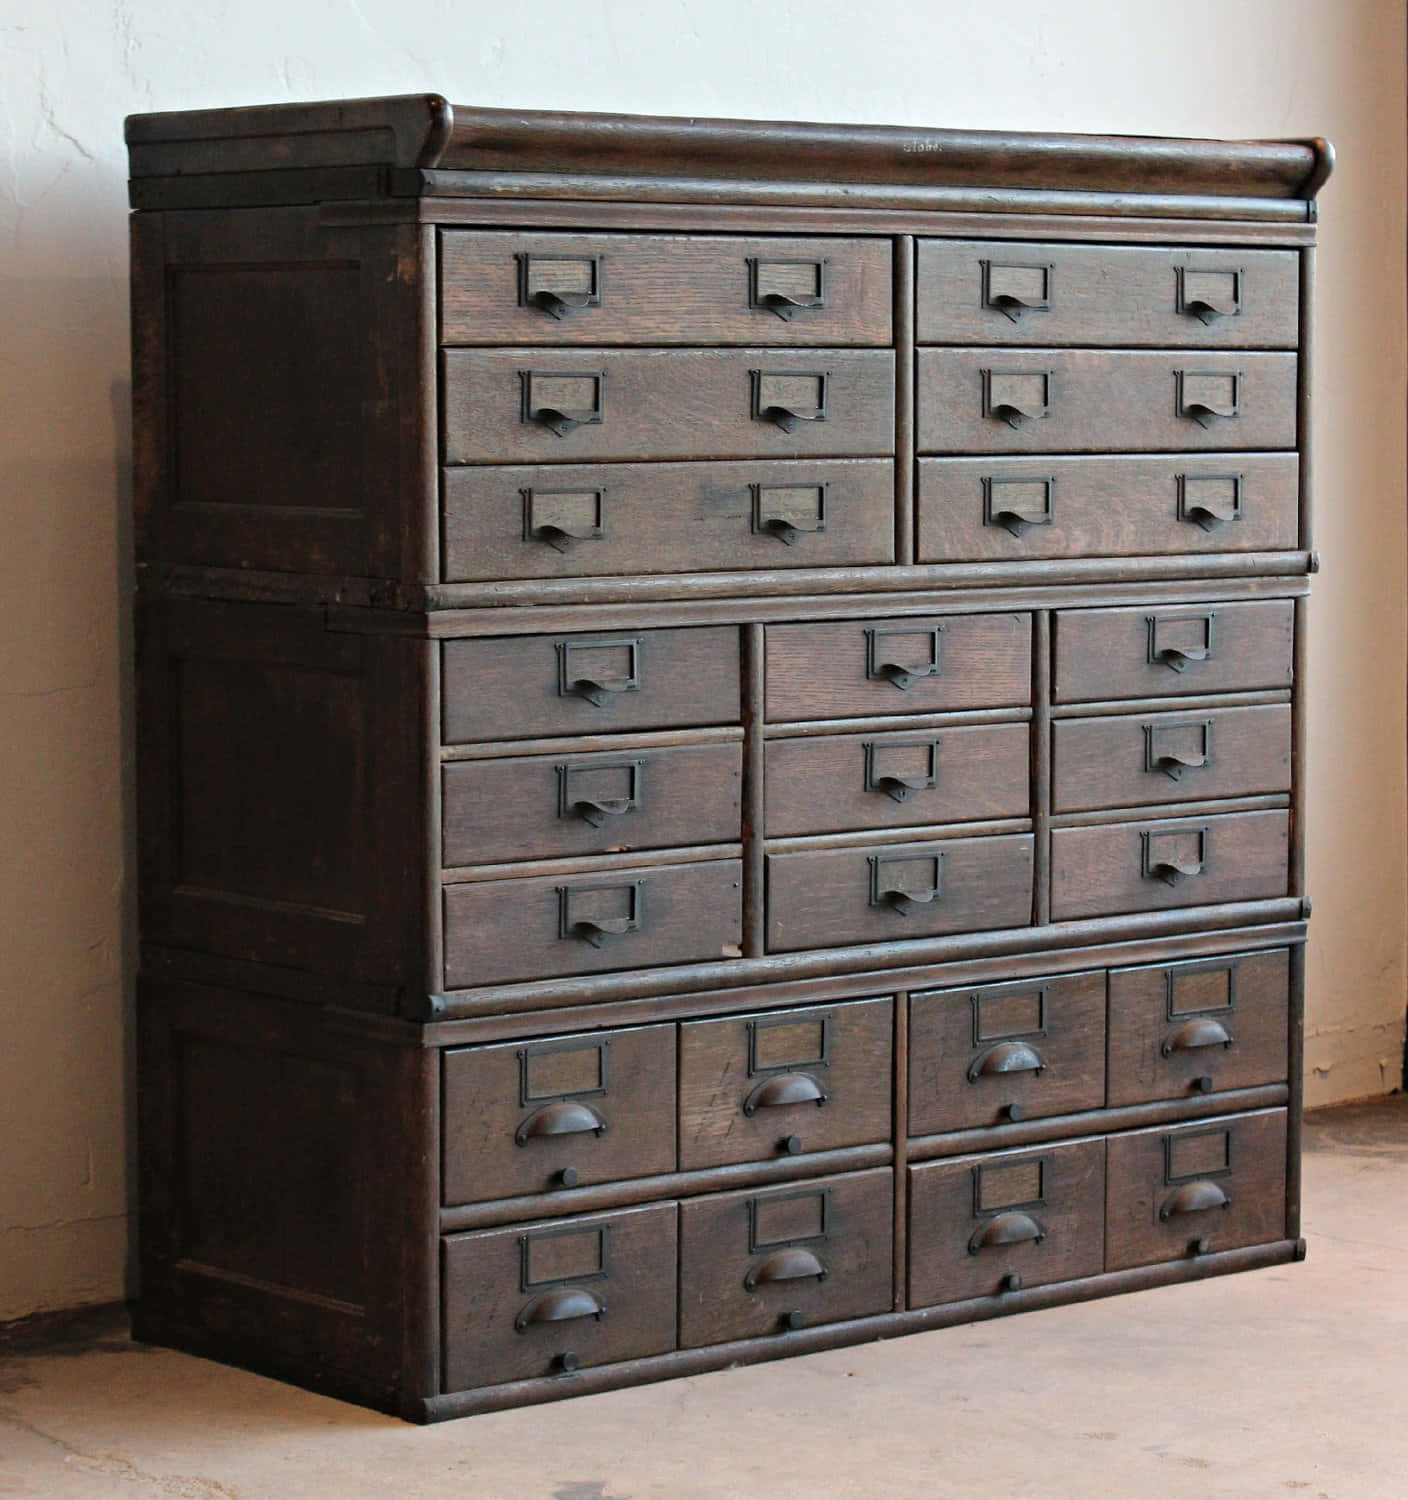 A Large Wooden Cabinet With Drawers